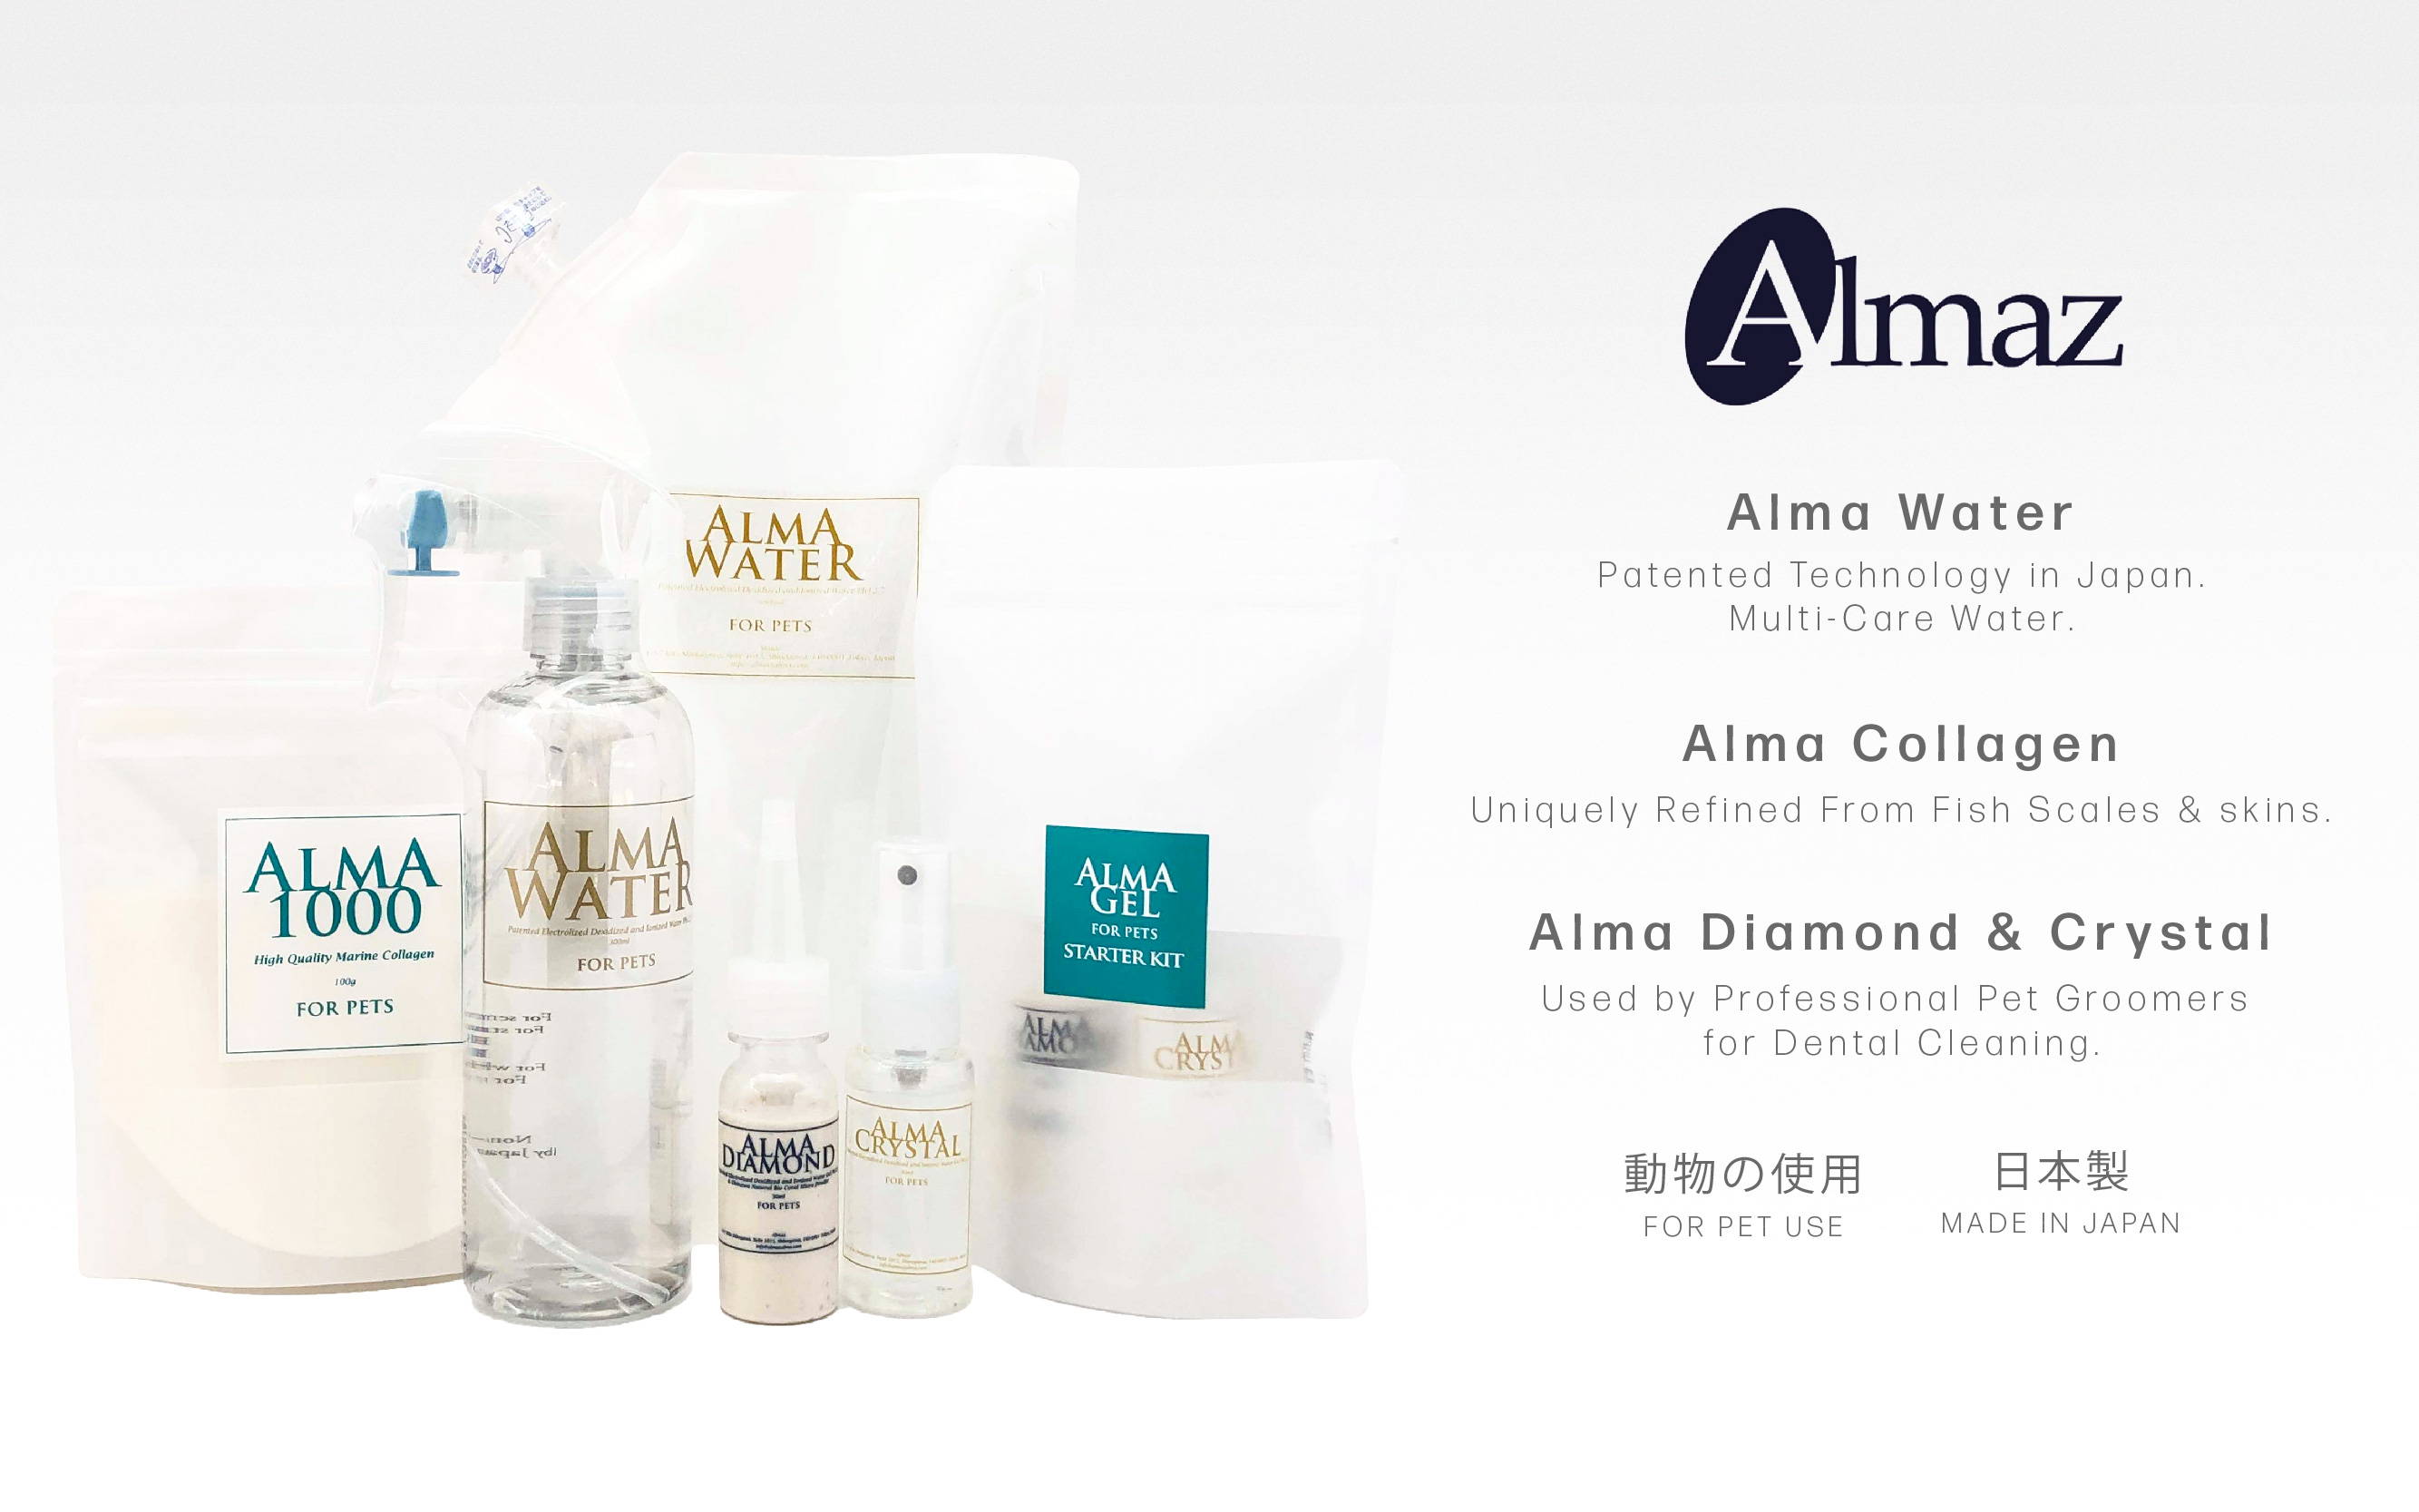 Almaz Alma pet care products made in Japan.